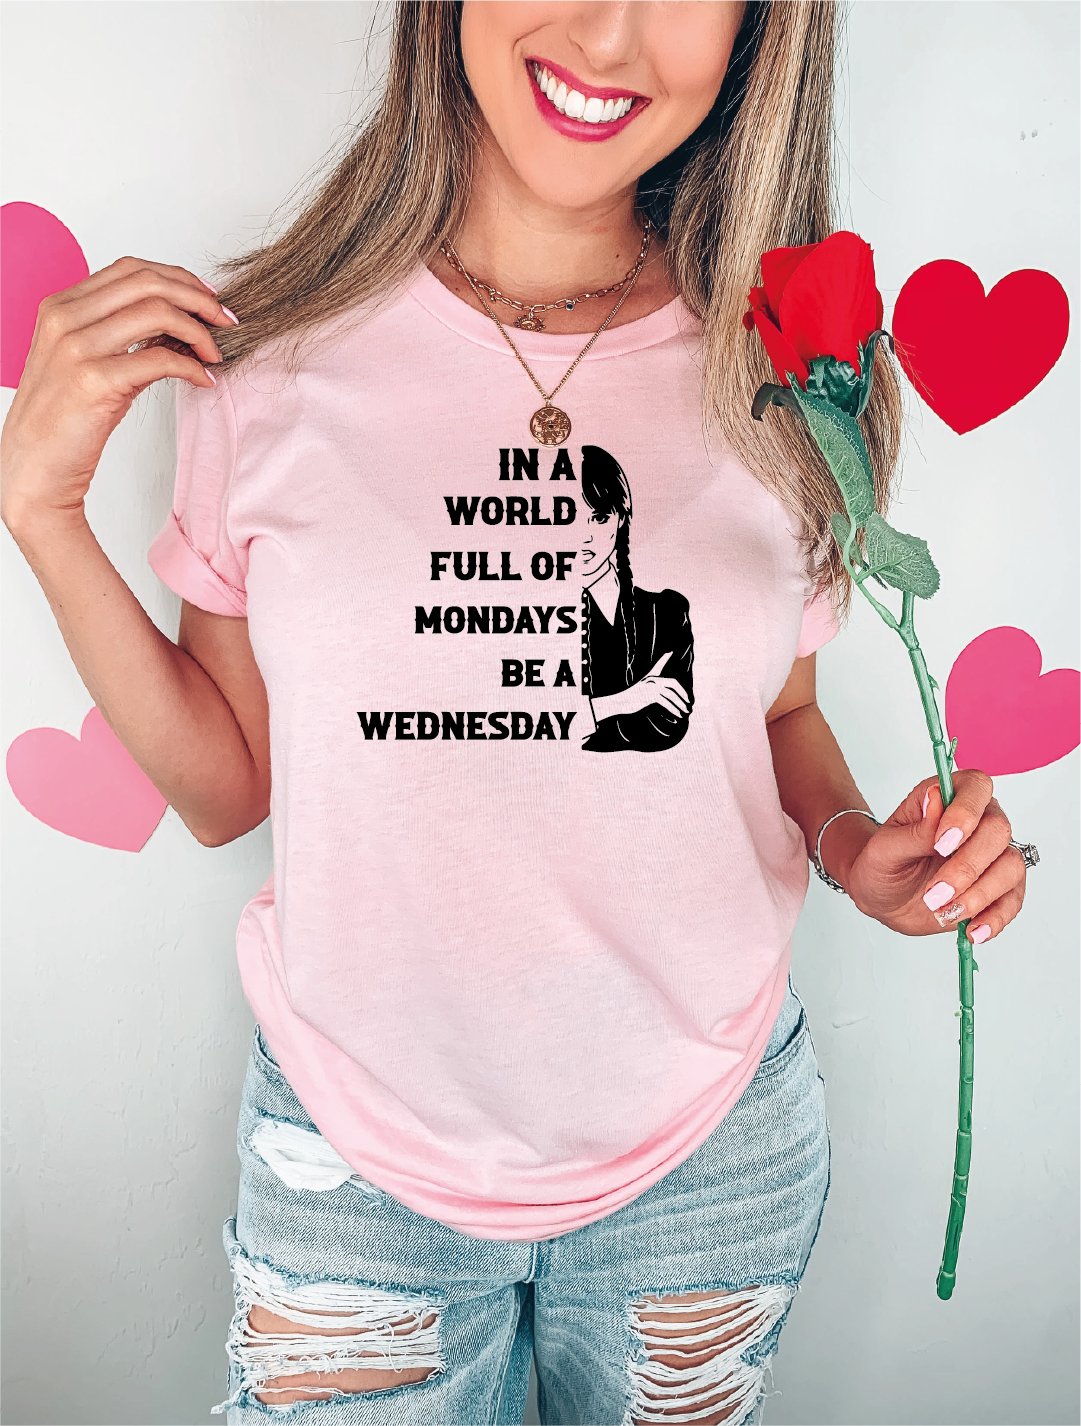 Wednesday Shirt, In a World Full of Mondays Be a Wednesday Tee, Nevermore Academy Tshirt, Wednesday Gift